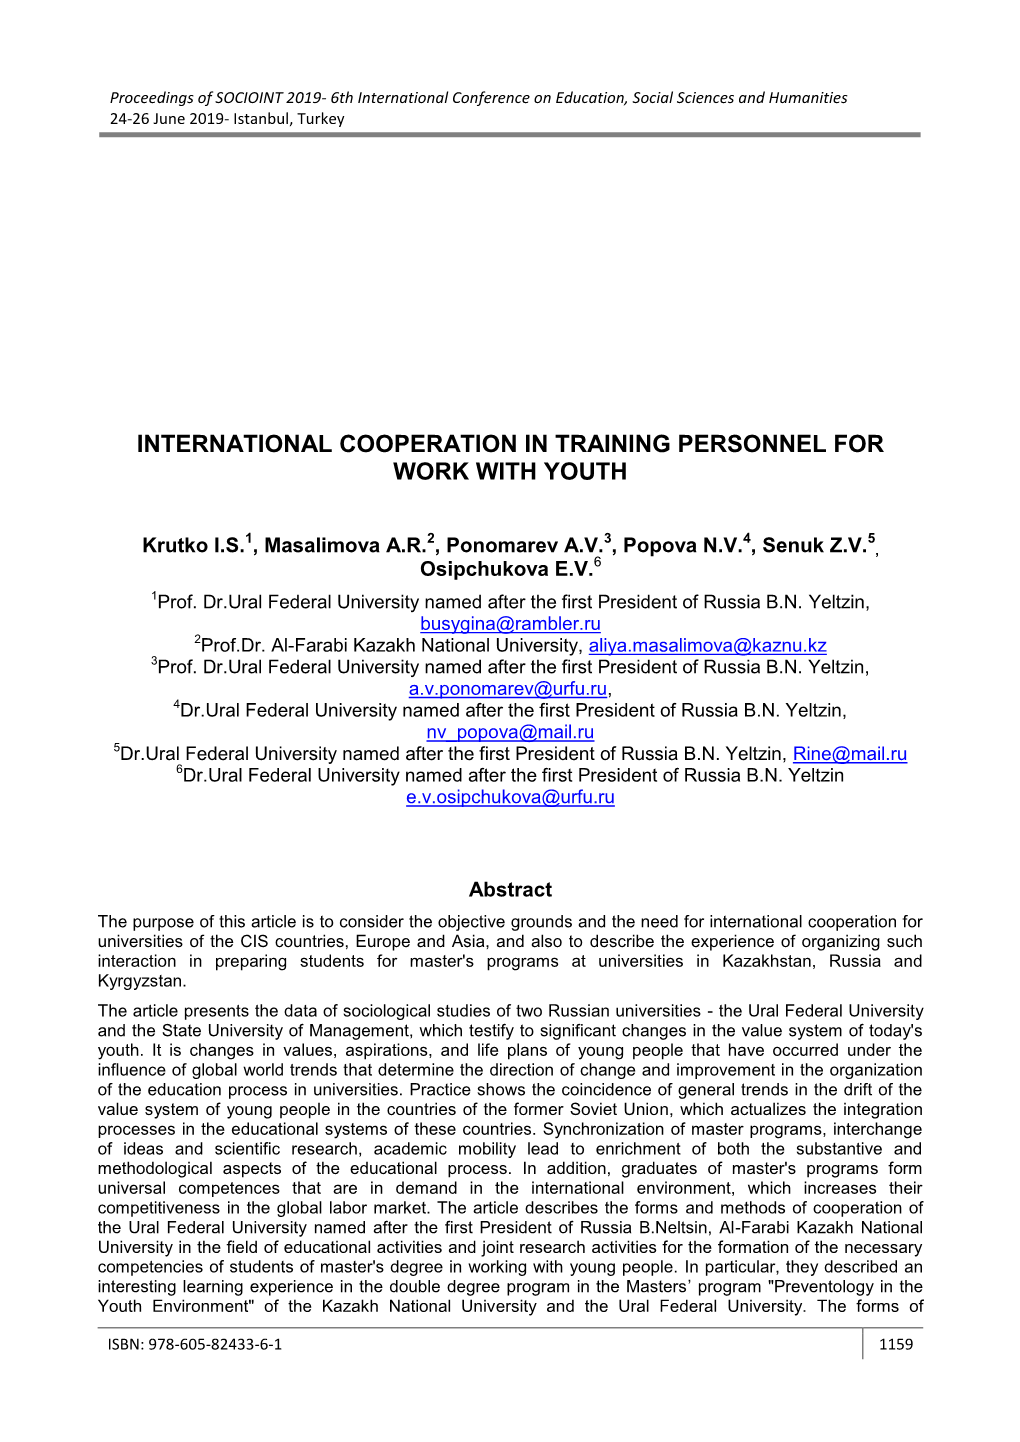 International Cooperation in Training Personnel for Work with Youth